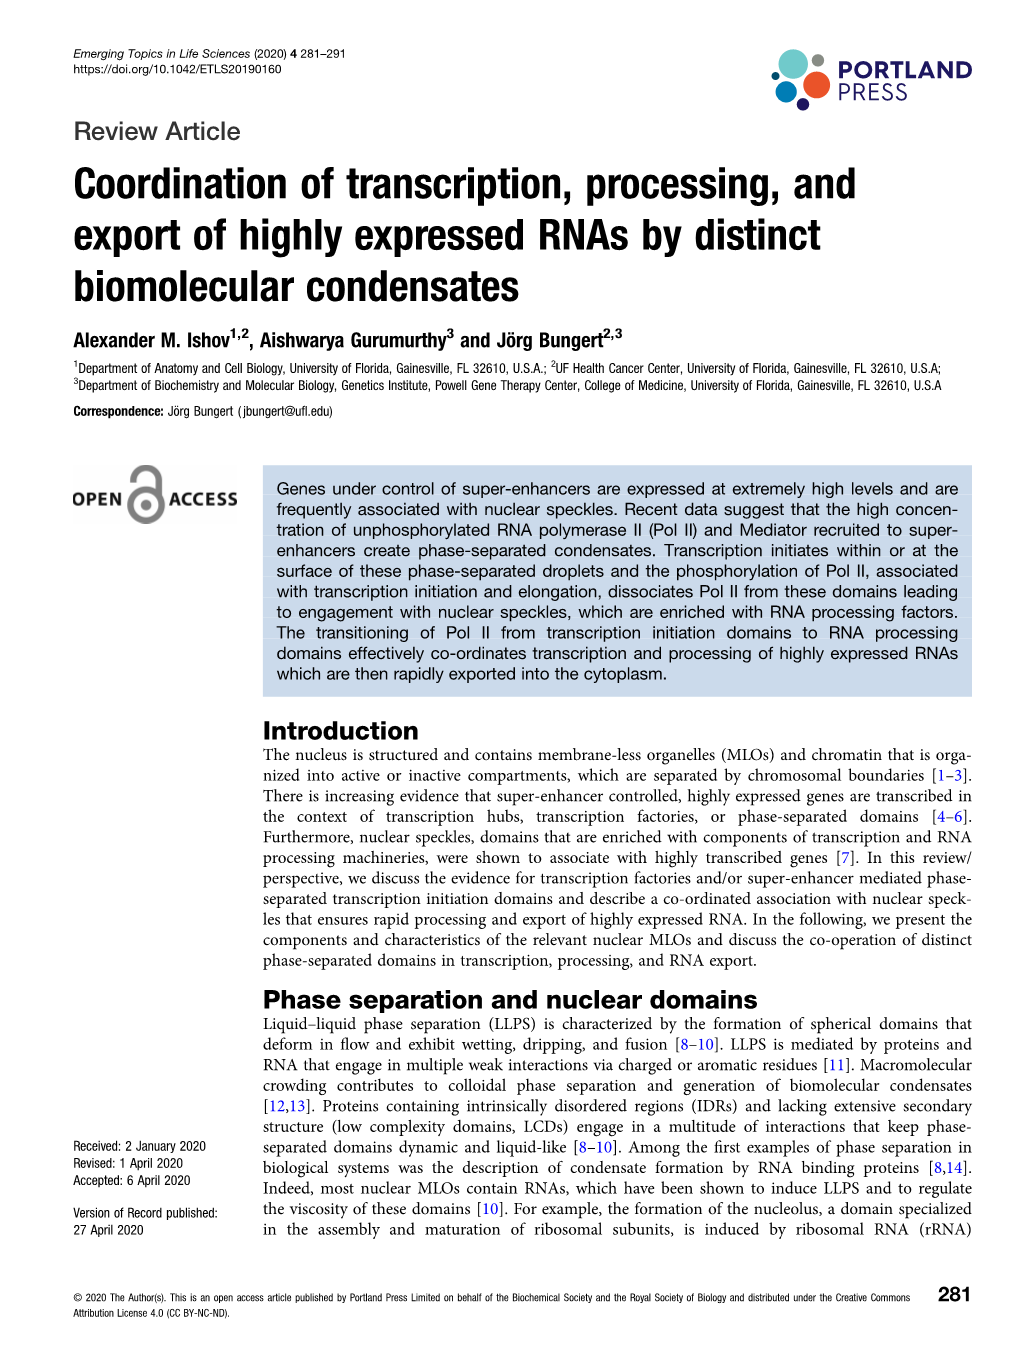 Coordination of Transcription, Processing, and Export of Highly Expressed Rnas by Distinct Biomolecular Condensates